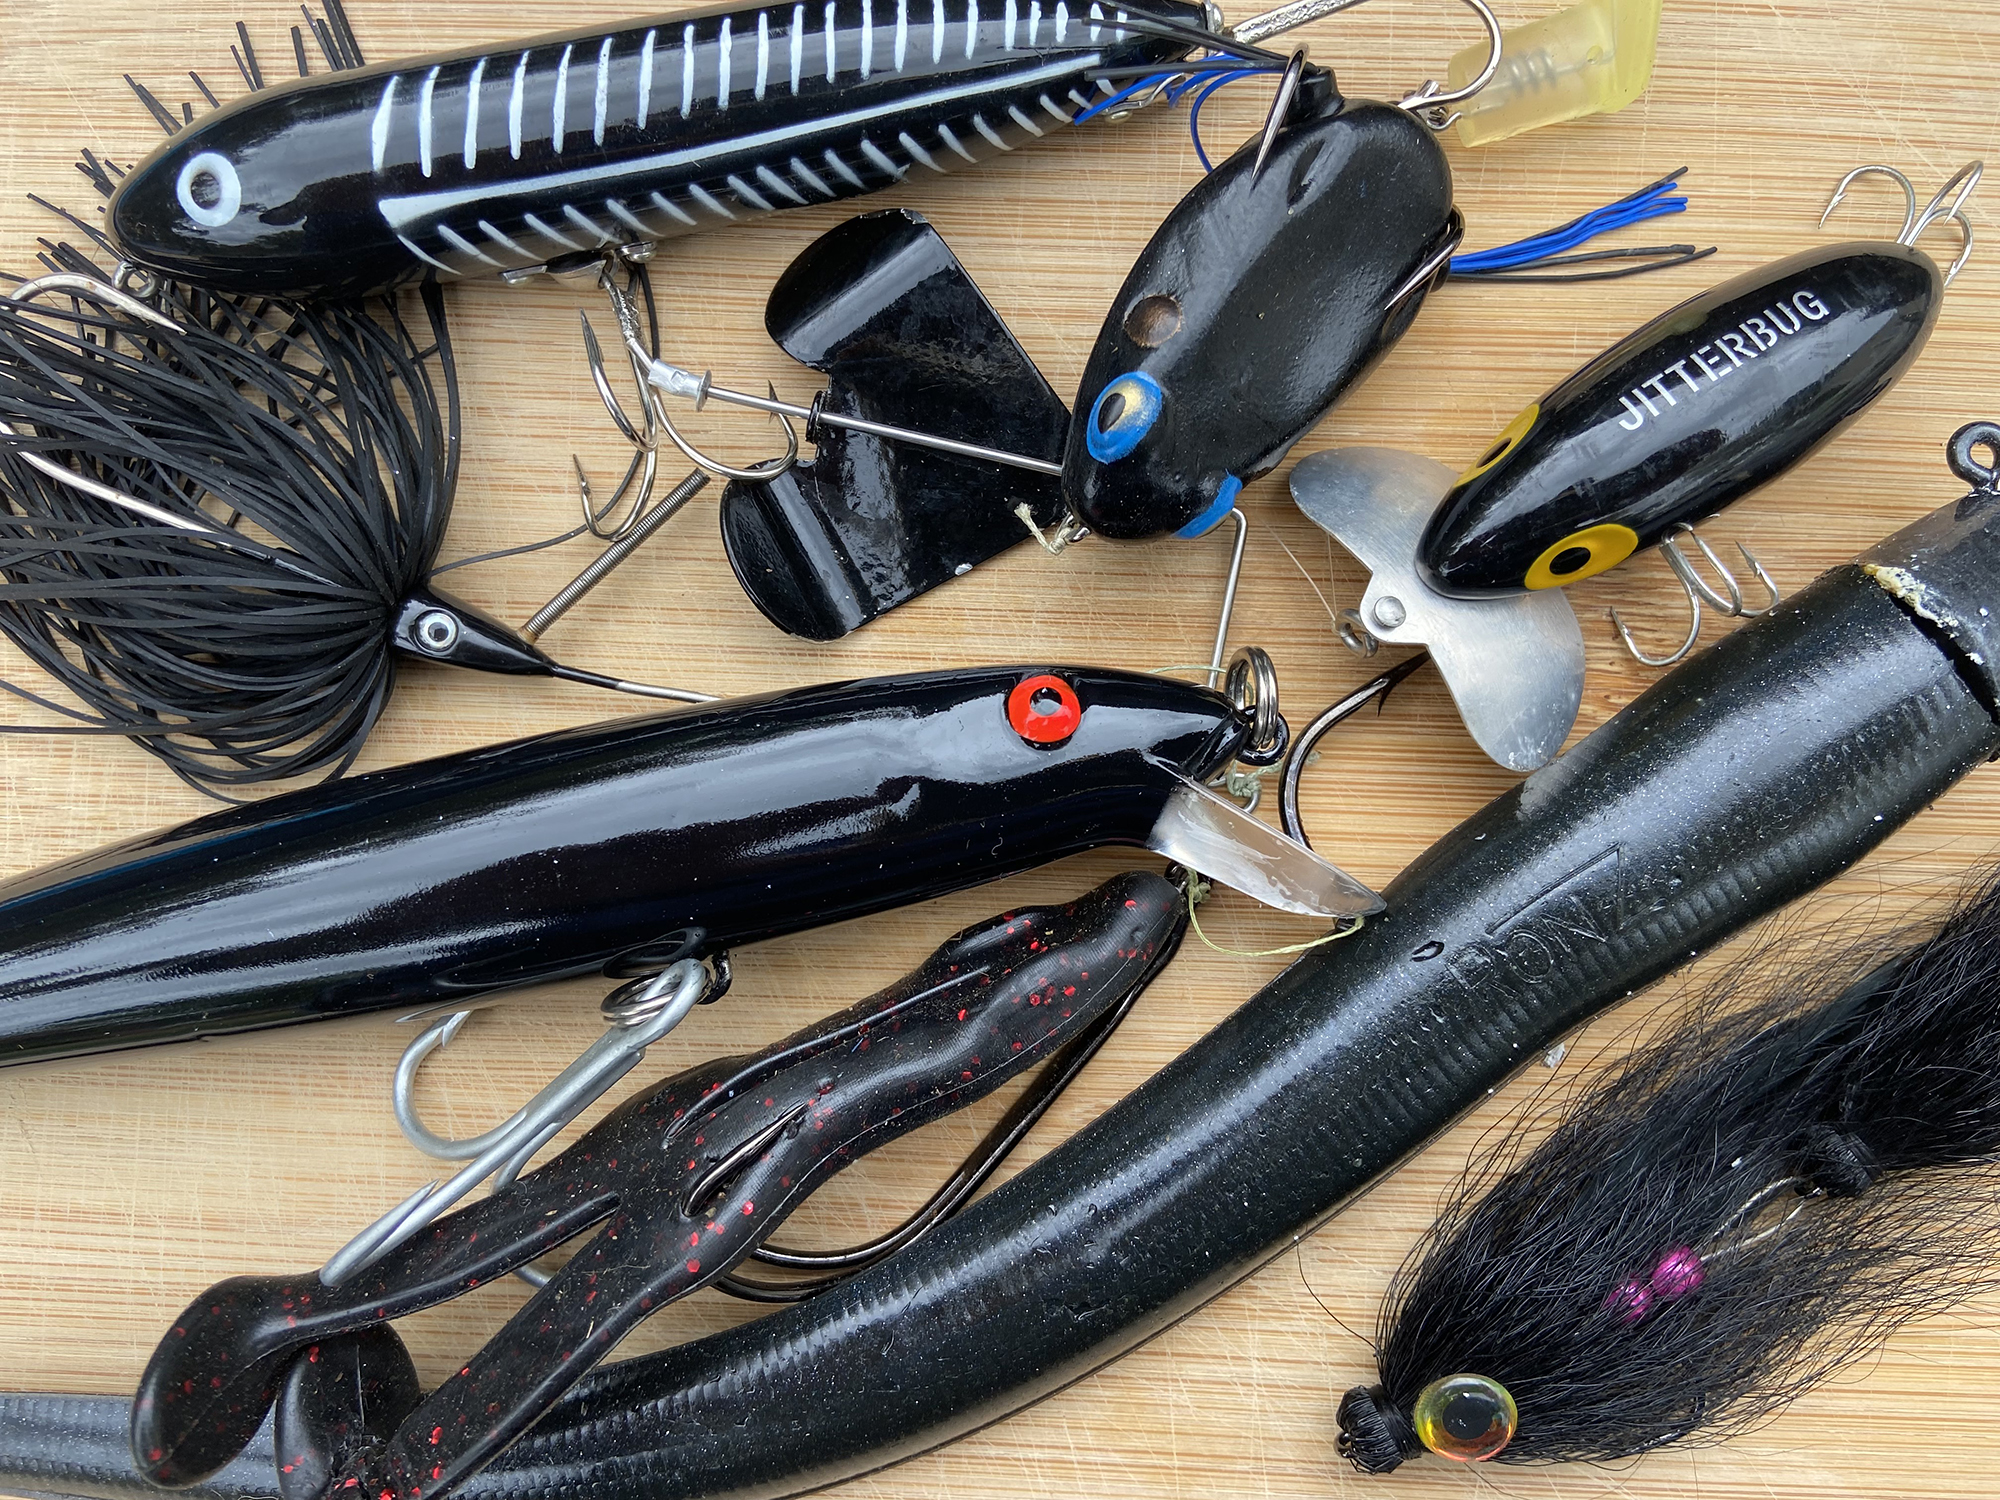 Best Fishing Lures For Freshwater Sport Fish: How to catch more